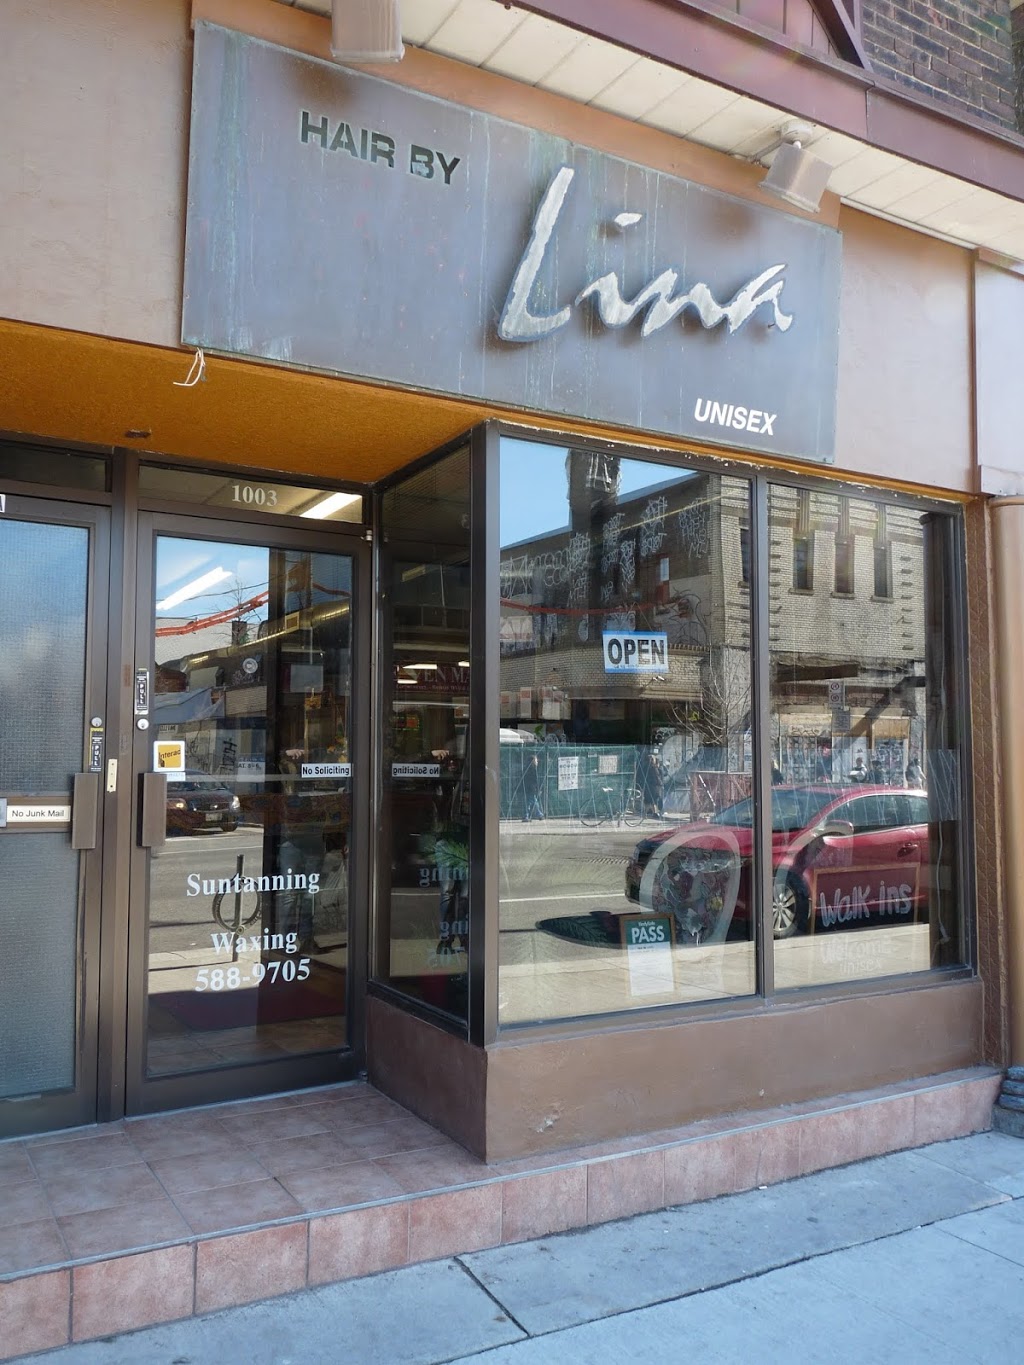 Hair by Lina Unisex | hair care | 1003 Bloor St W, Toronto, ON M6H 1M1, Canada | 4165889705 OR +1 416-588-9705